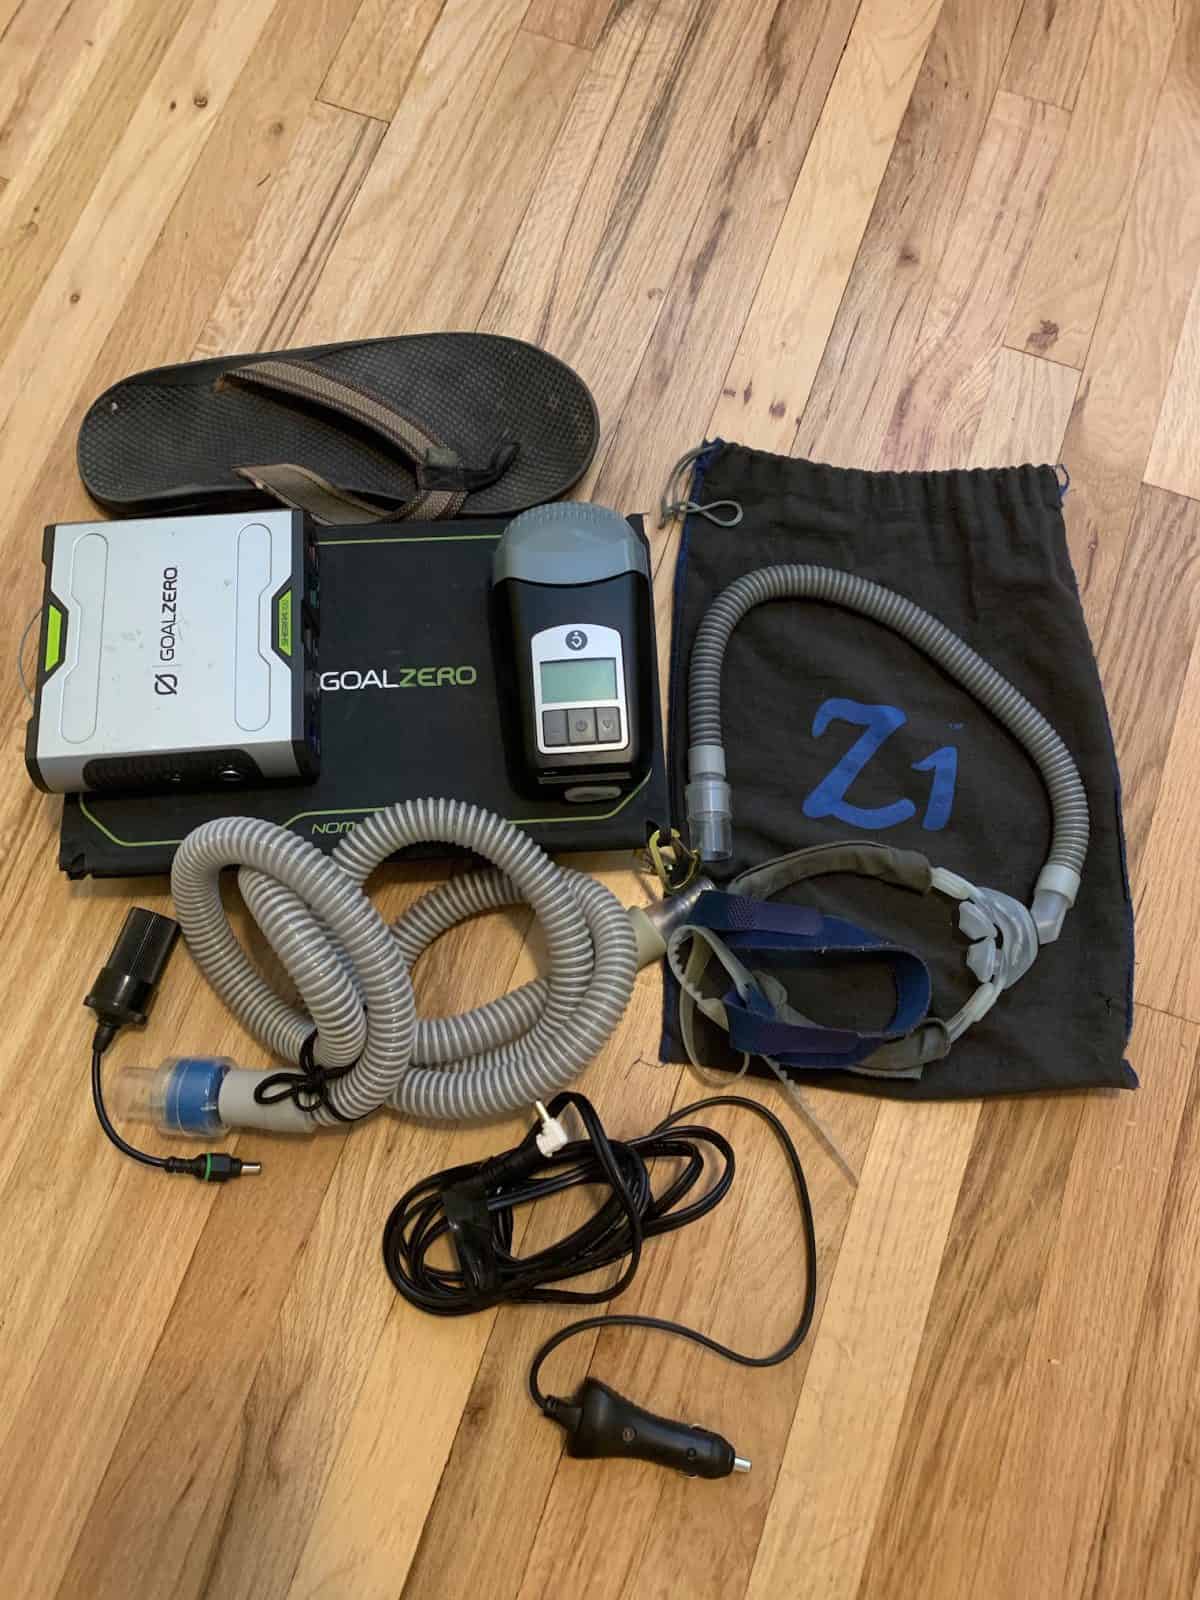 Complete Solar CPAP kit with size 12 Chaco sandal for scale